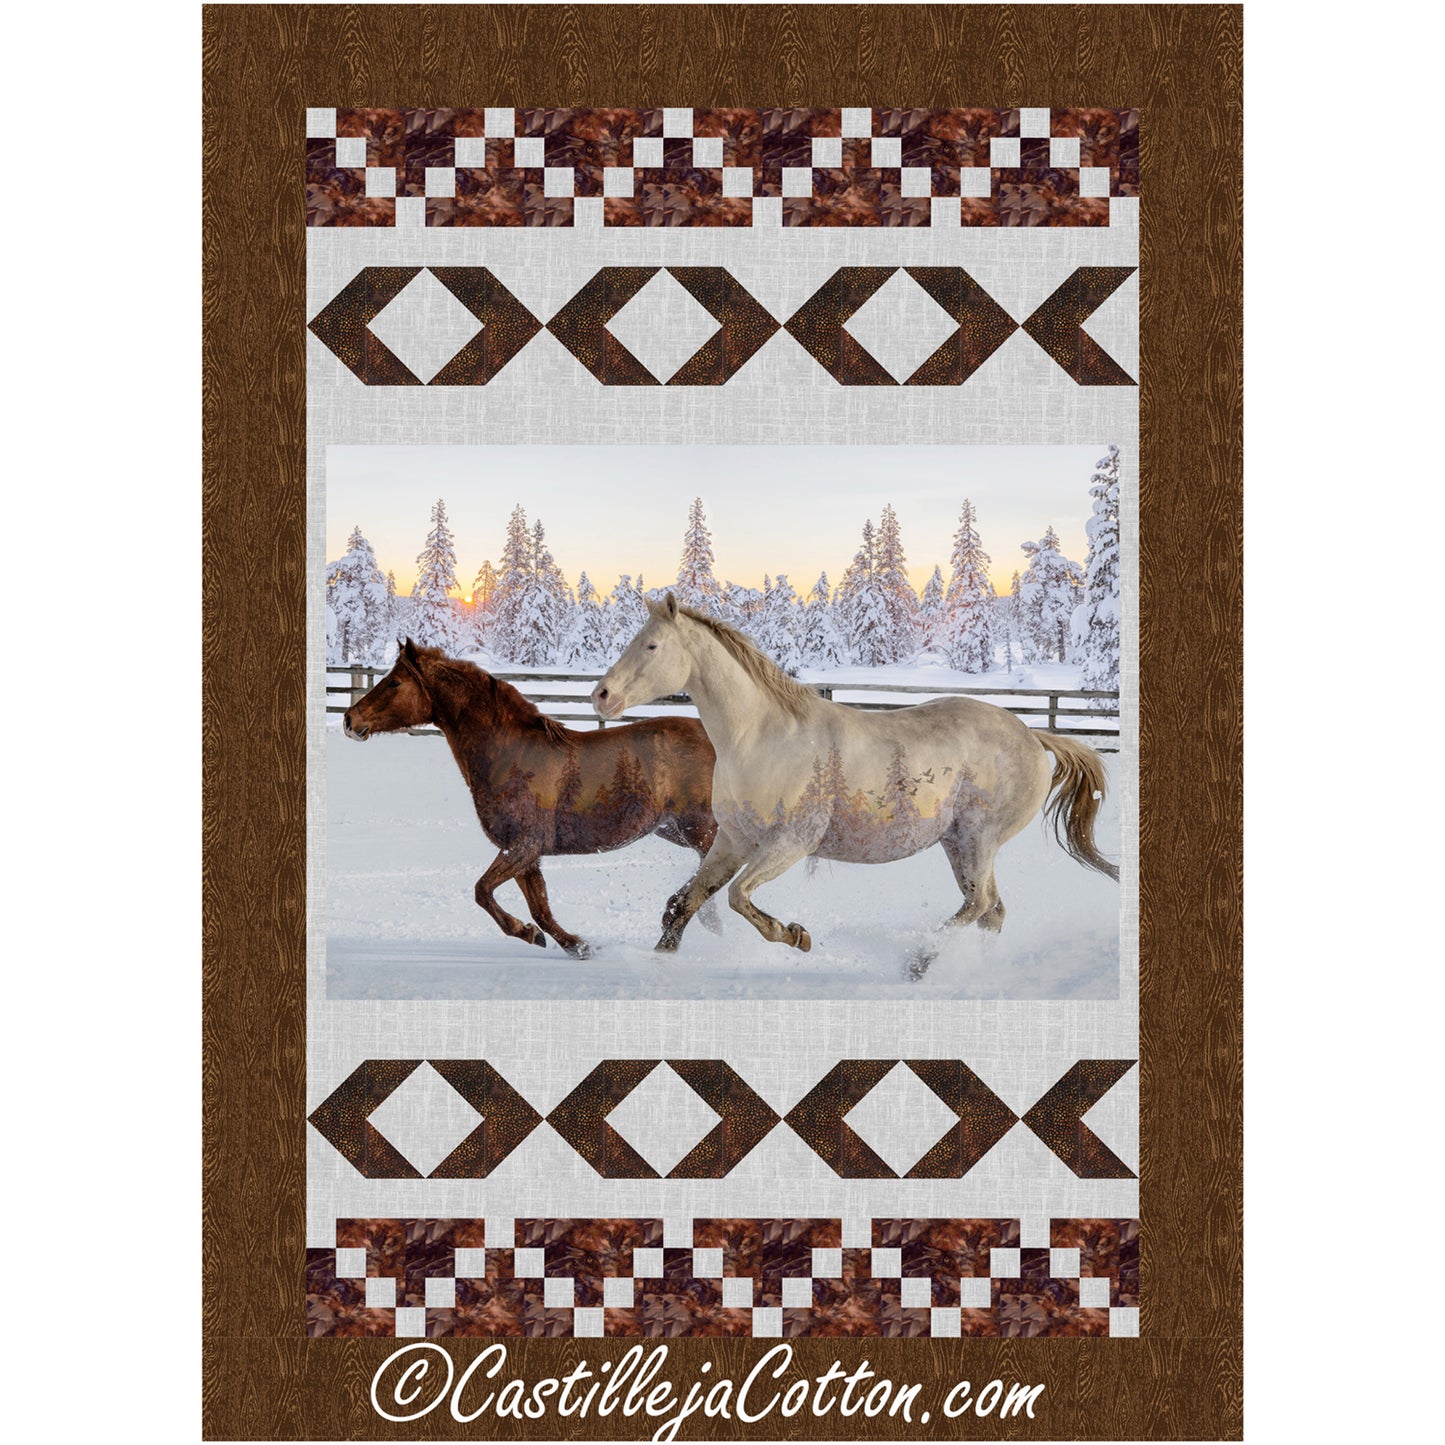 Horses in Snow Quilt Pattern CJC-59431 - Paper Pattern